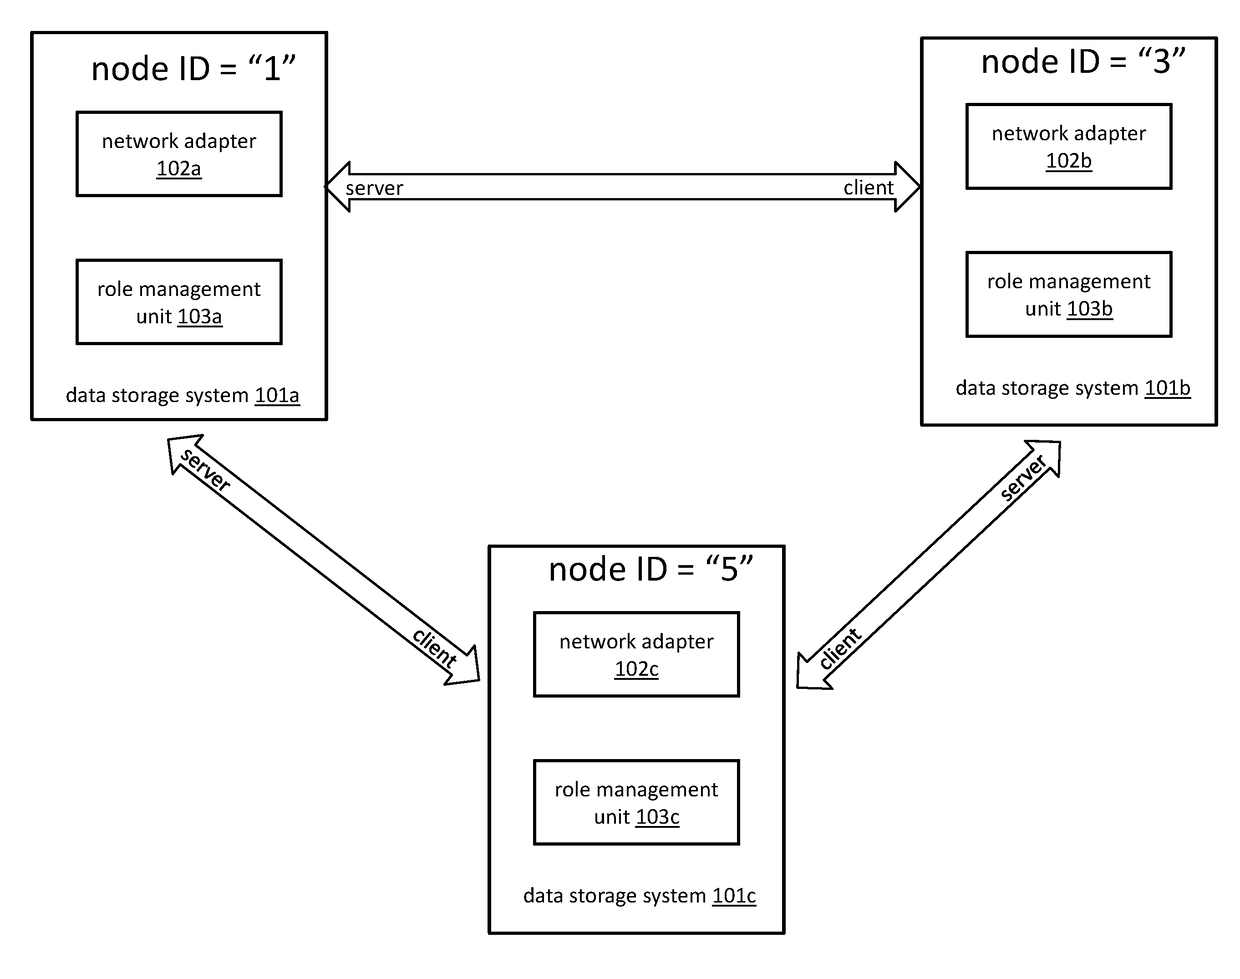 Automatic client-server role detection among data storage systems in a distributed data store